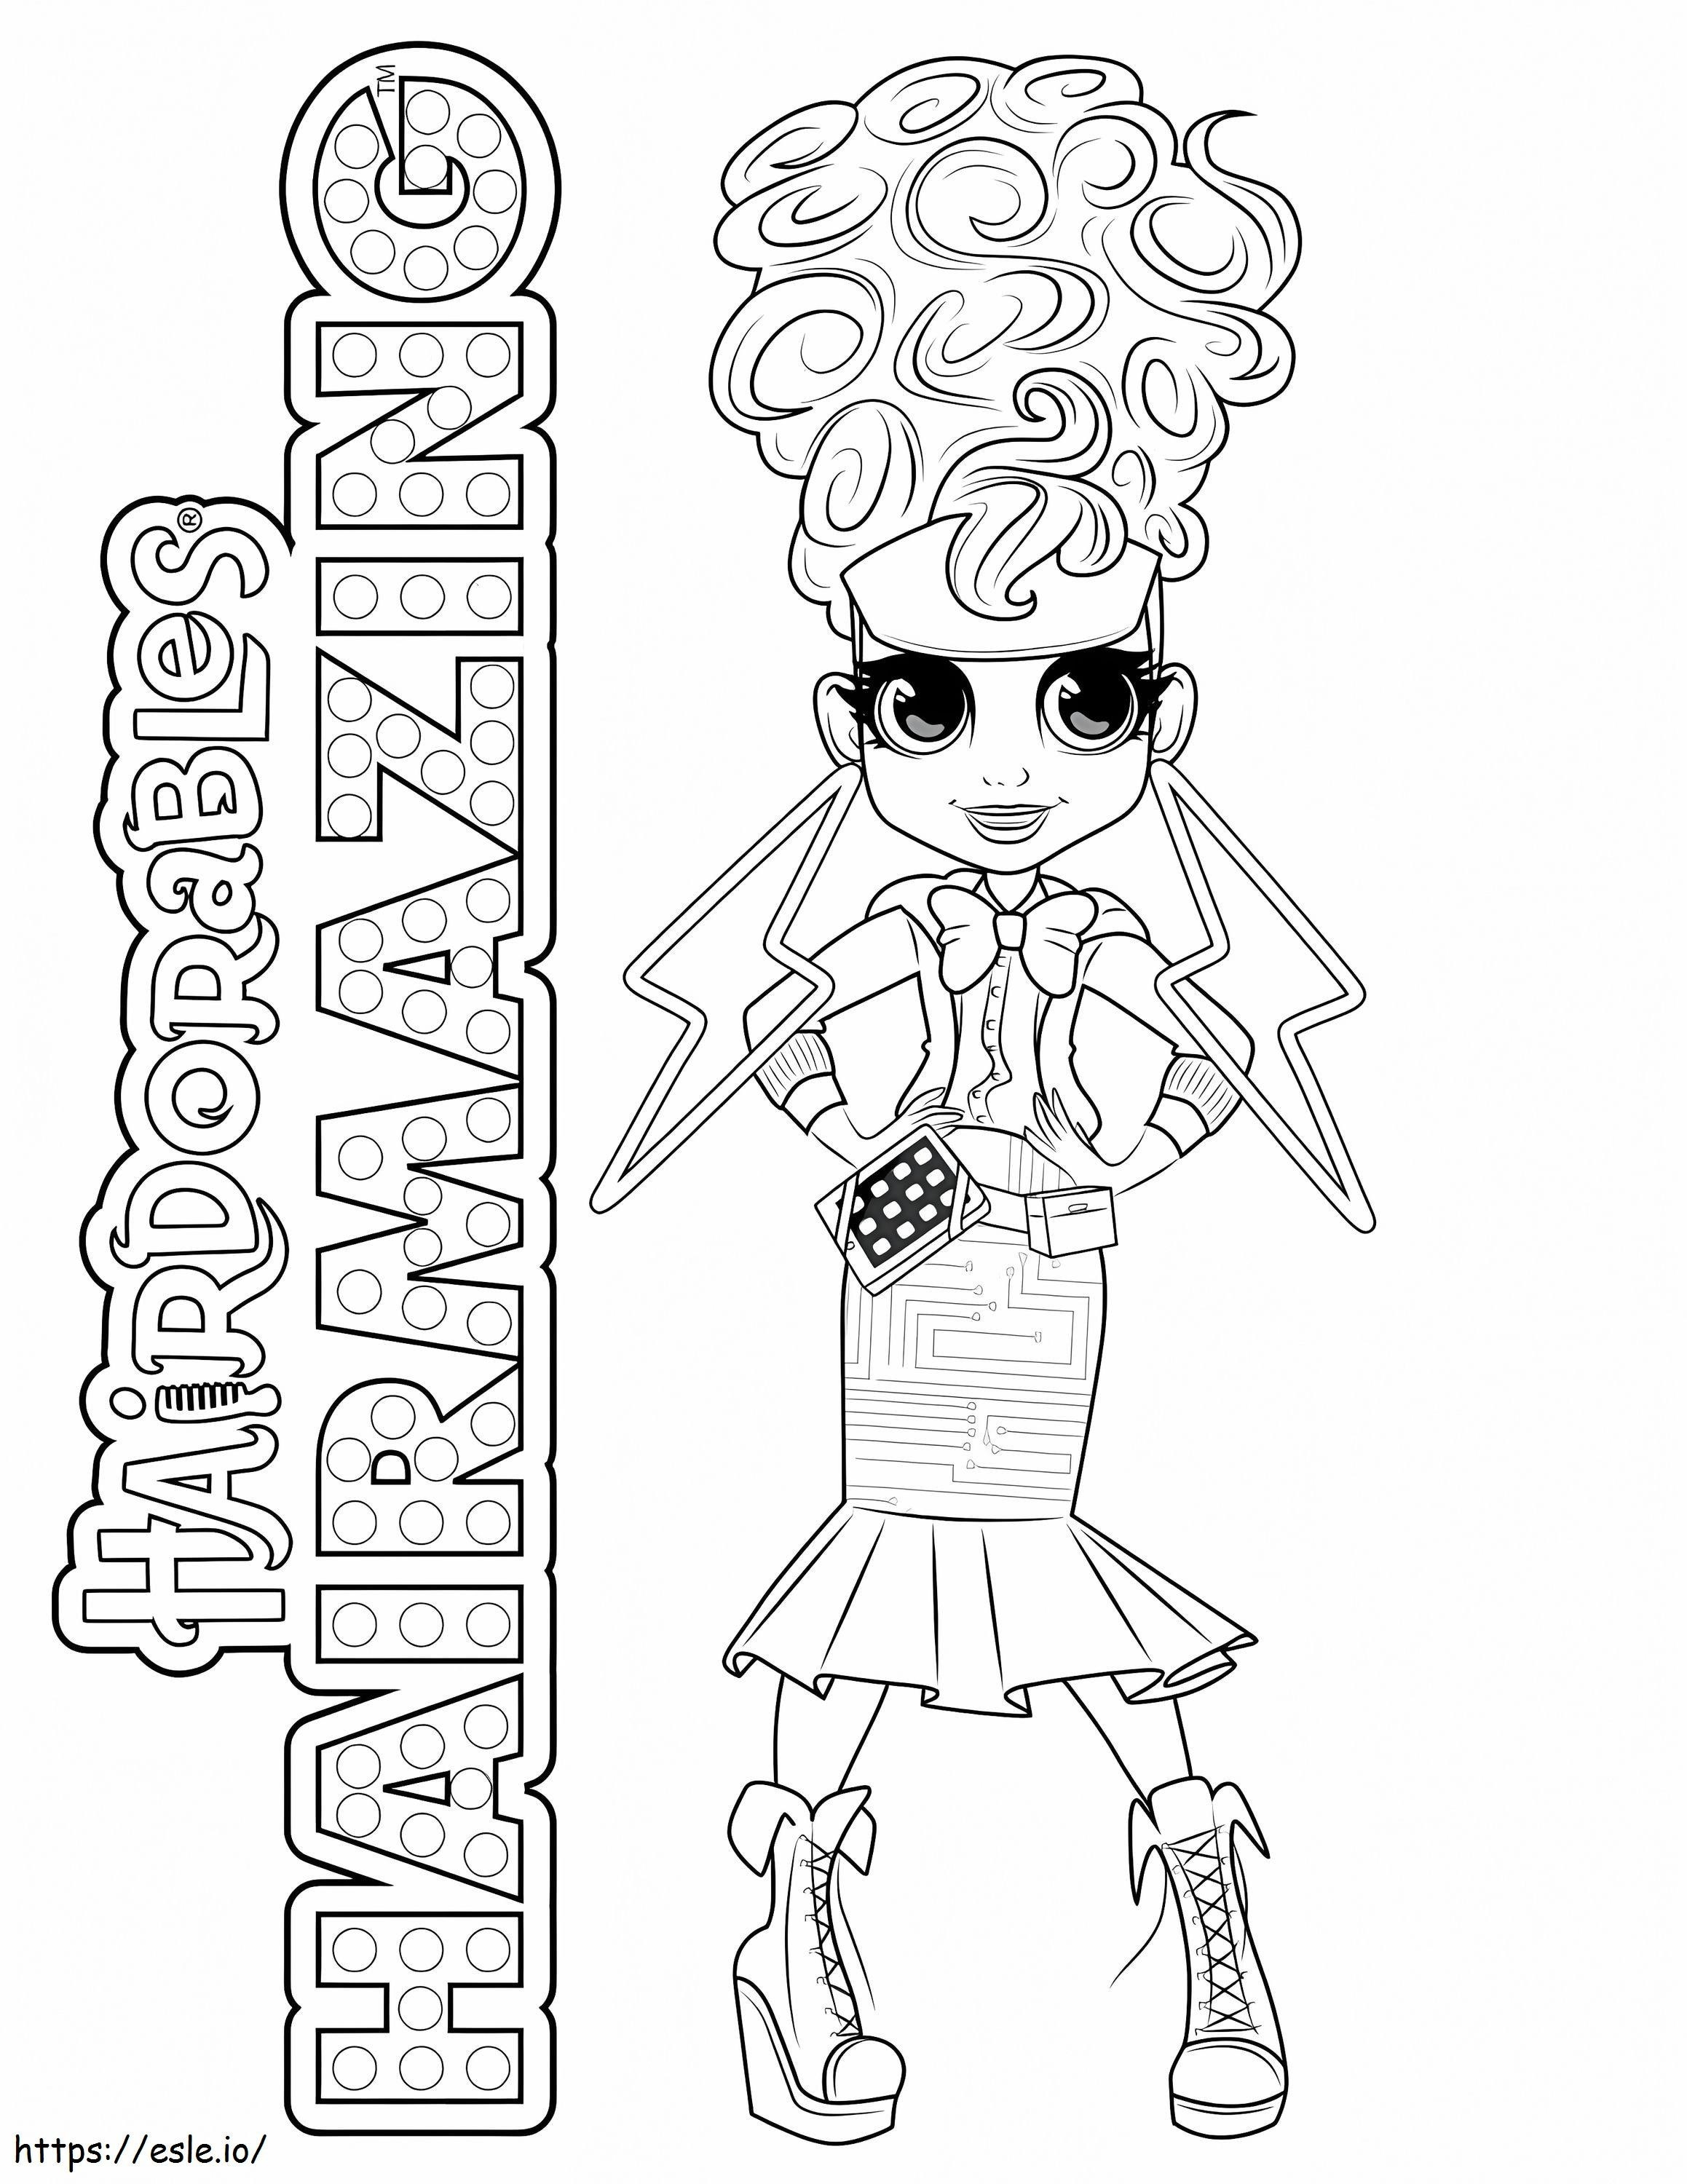 Kali Hairdorables coloring page